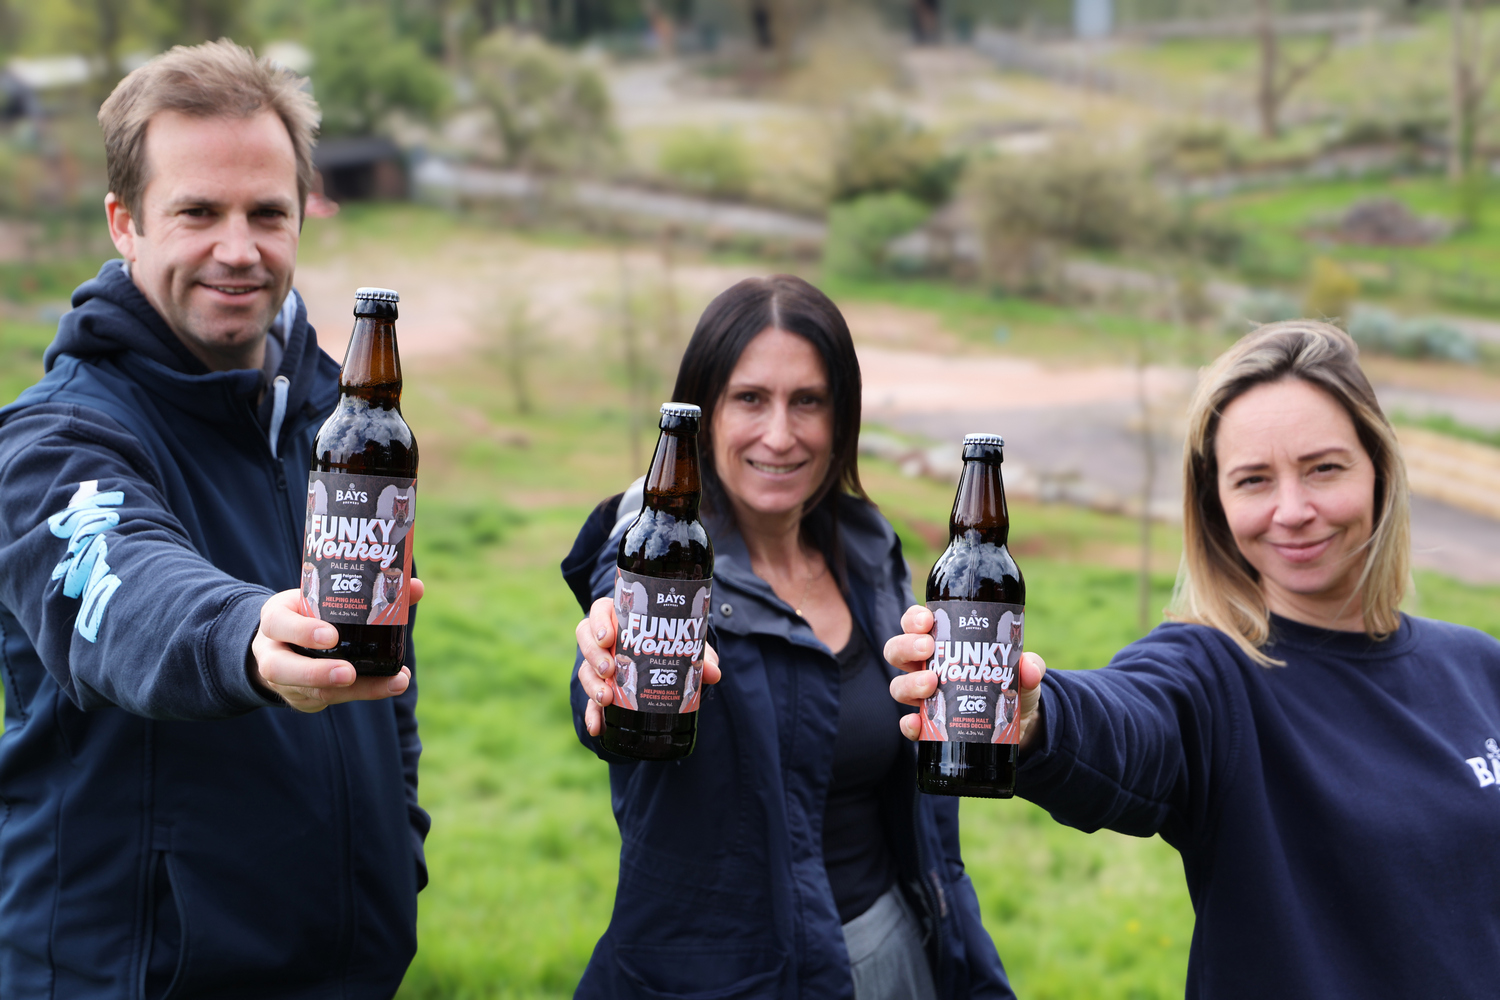 Bays beer will help raise funds for zoo conservation work thumbnail